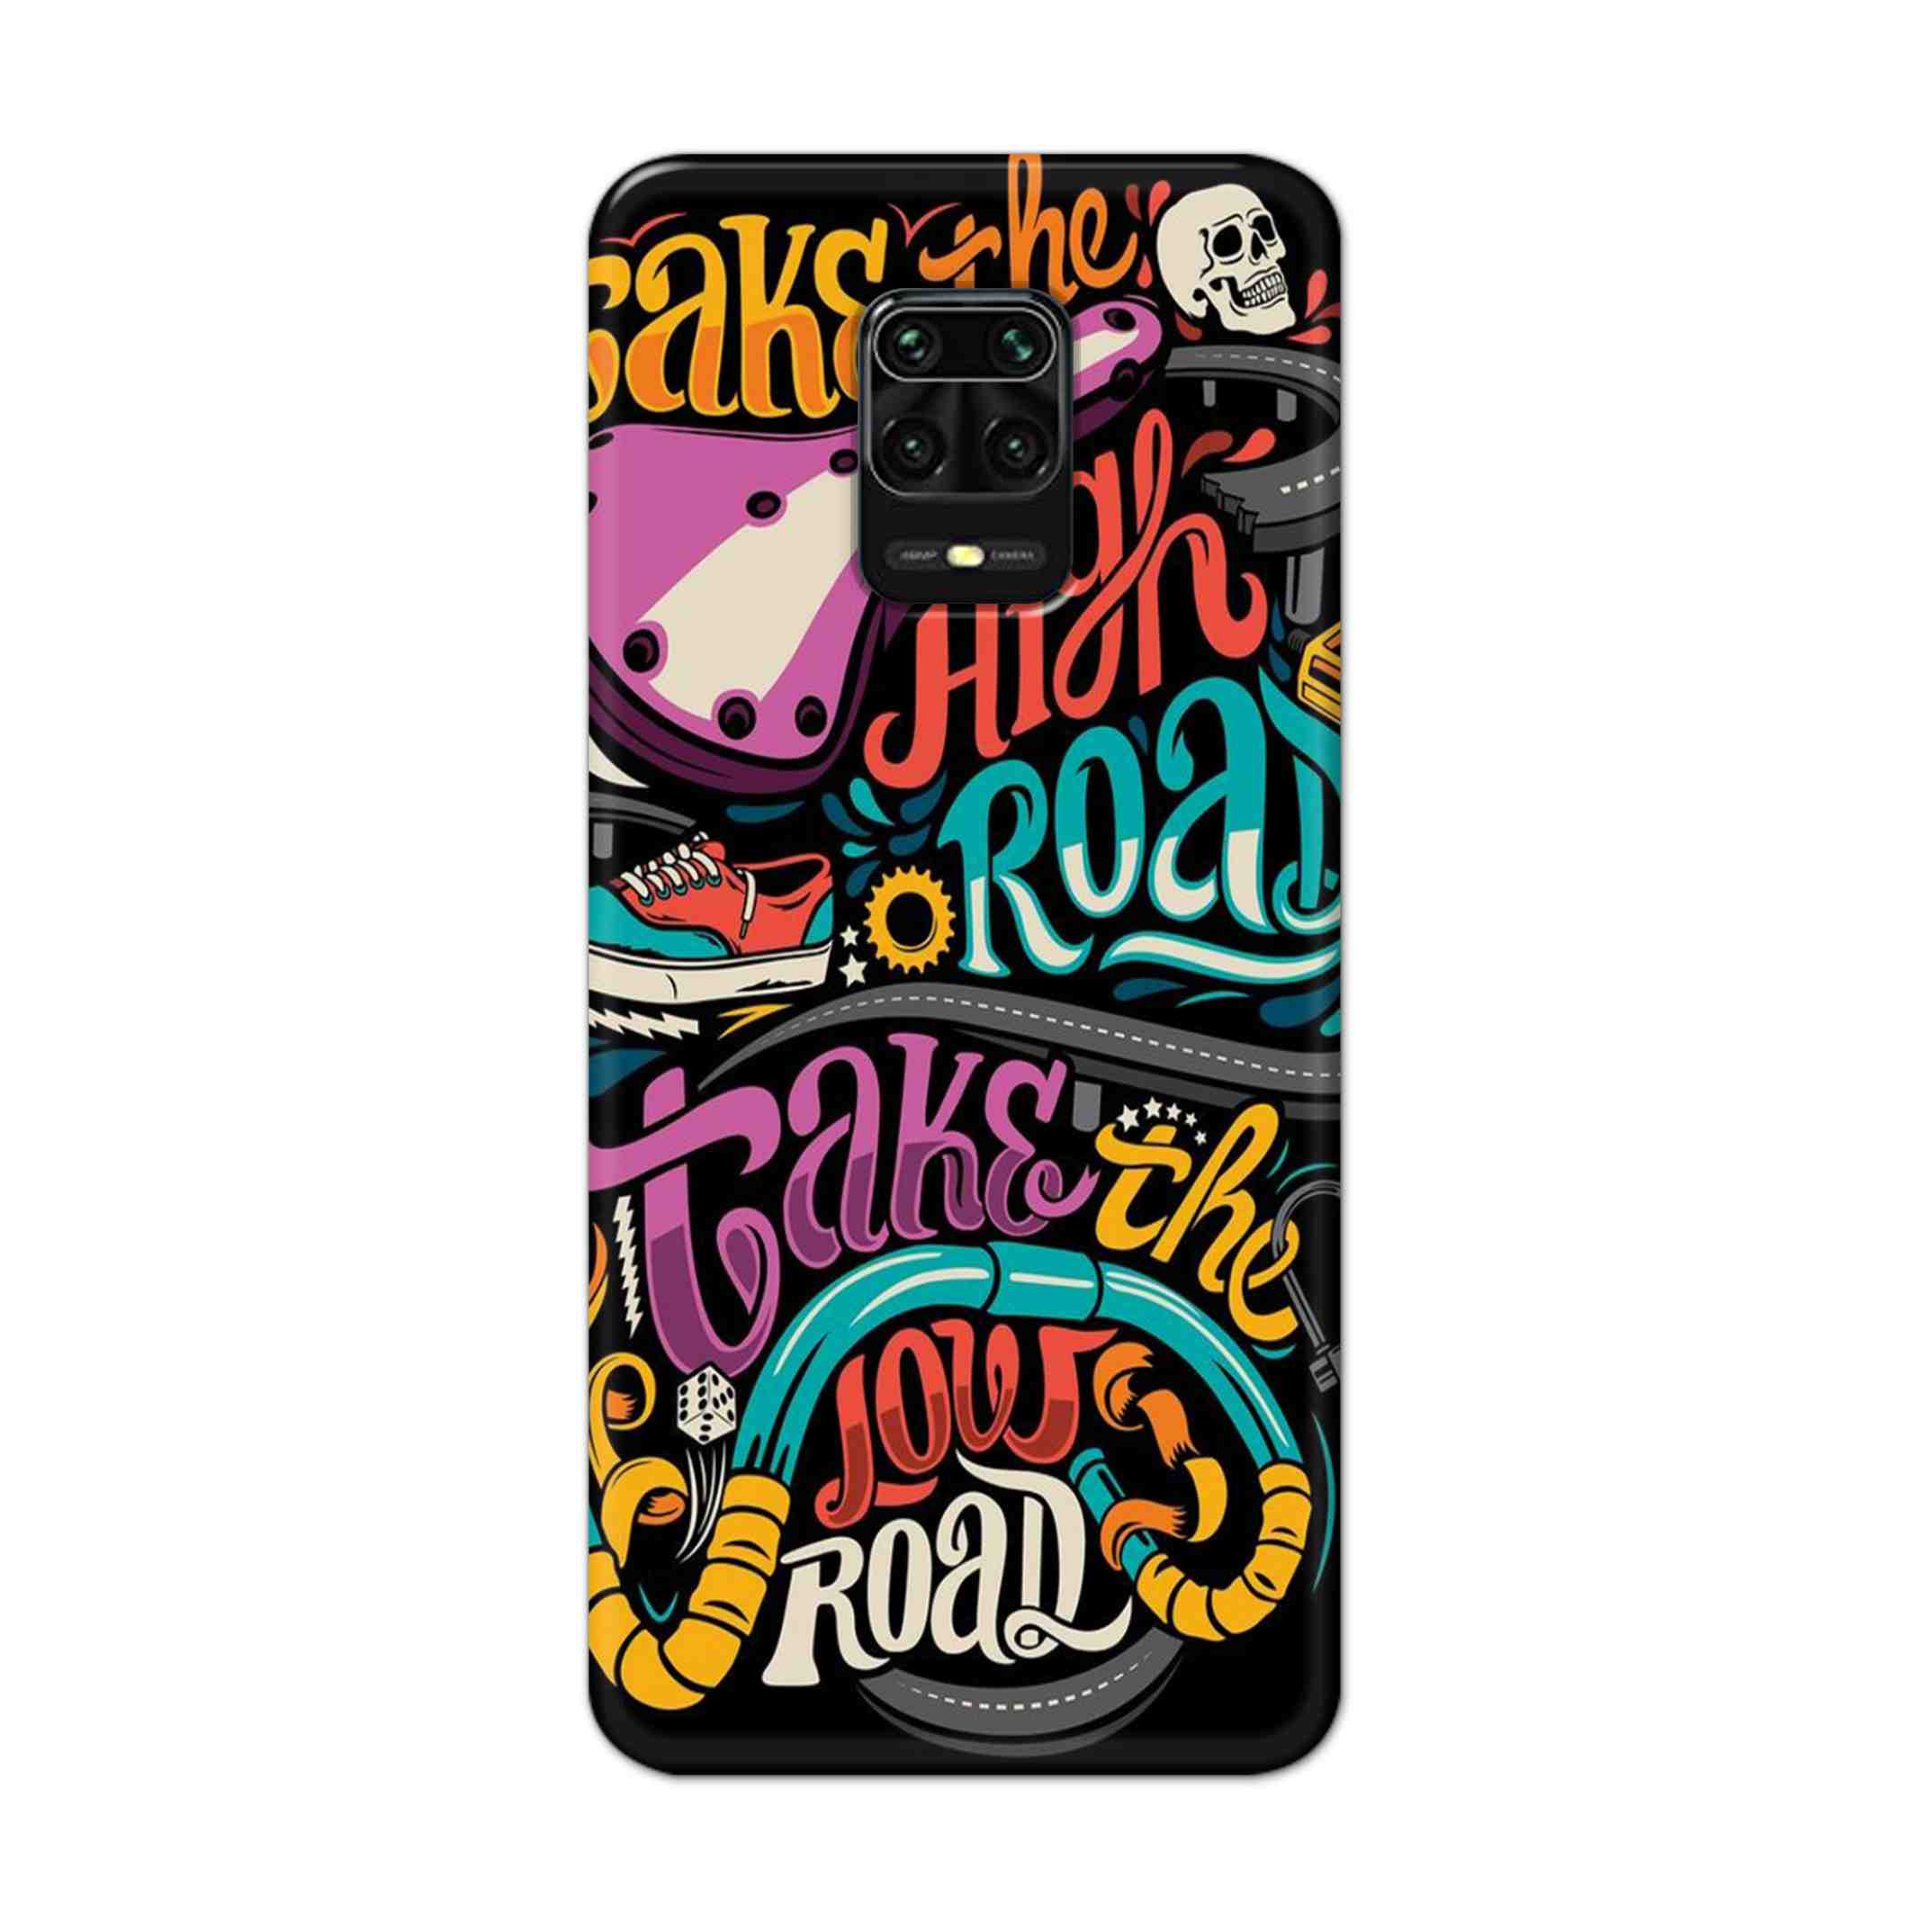 Buy Take The High Road Hard Back Mobile Phone Case Cover For Redmi Note 9 Pro Online